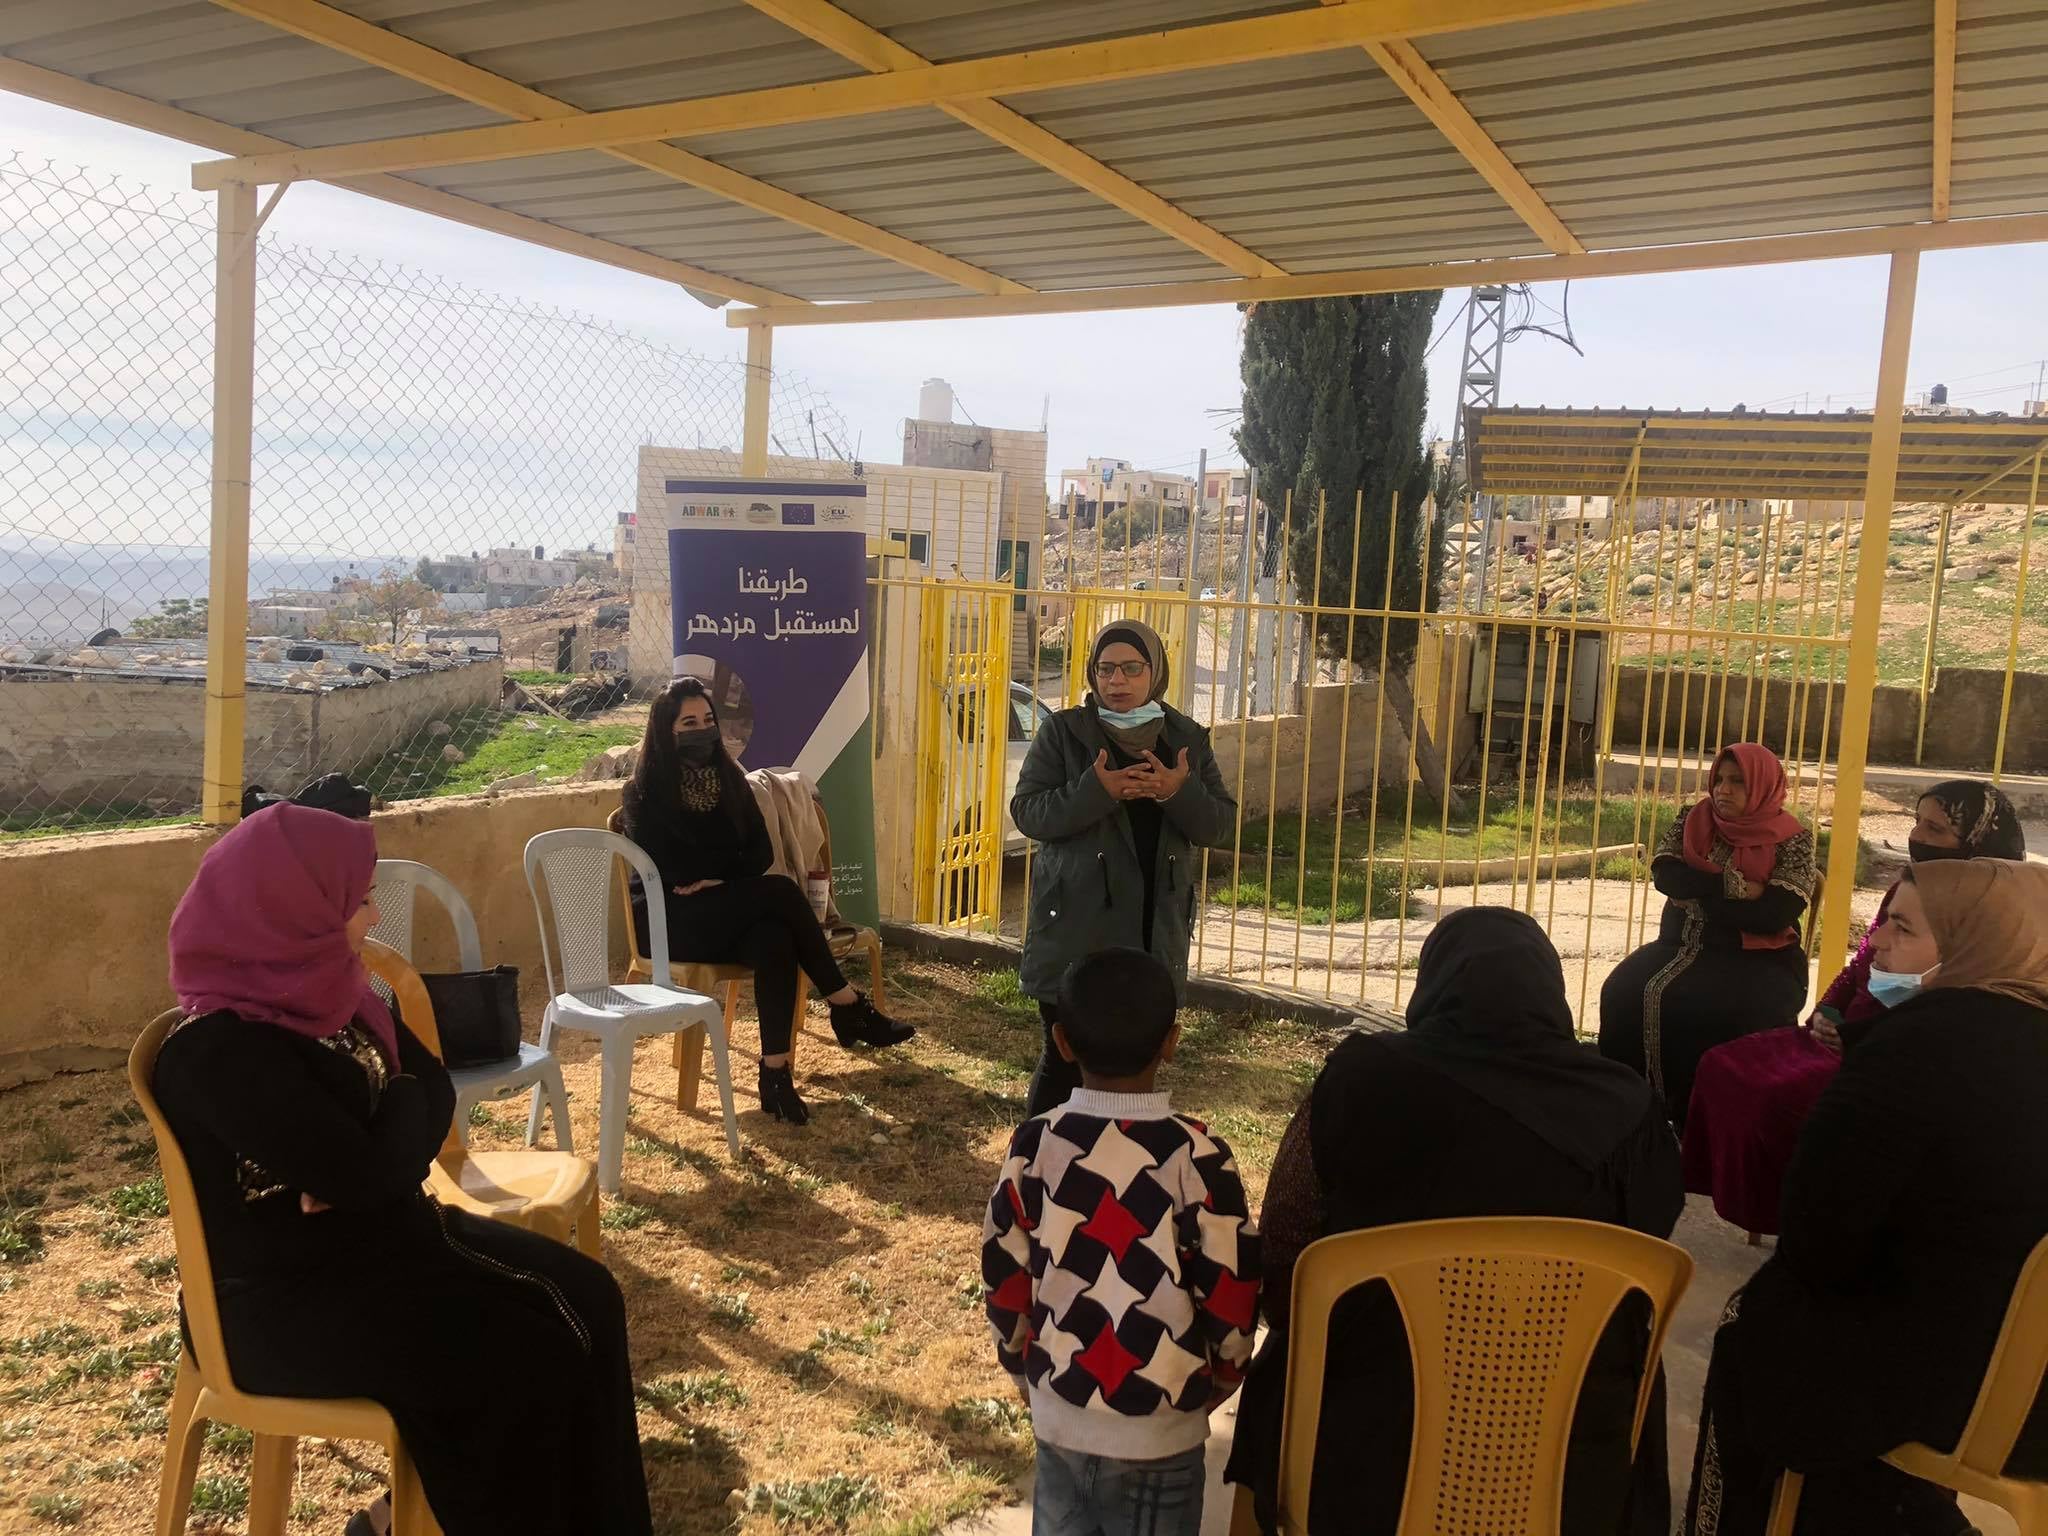  ADWAR Association launched the Dialogue meetings with local influence men today Tuesday 01/26/2021 in  Al Rashaida Bedouin community – Bethlehem, in cooperation with the Women Protection Committees